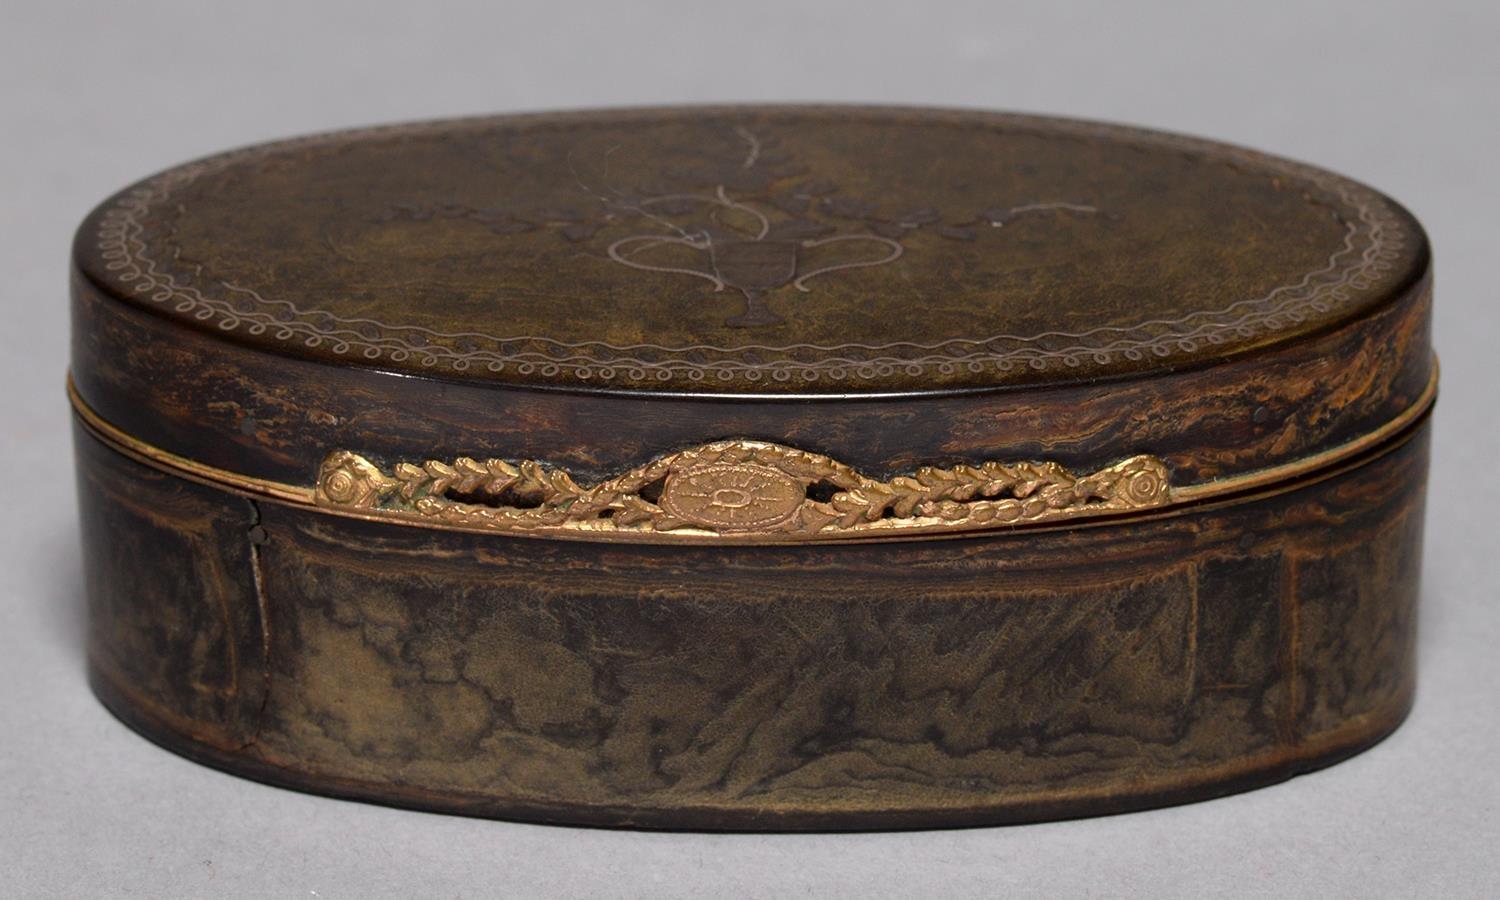 A LOUIS XVI OVAL PIQUE SNUFF BOX, C1780, OF HORN, THE LID INLAID IN SILVER WITH A VASE OF FLOWERS,